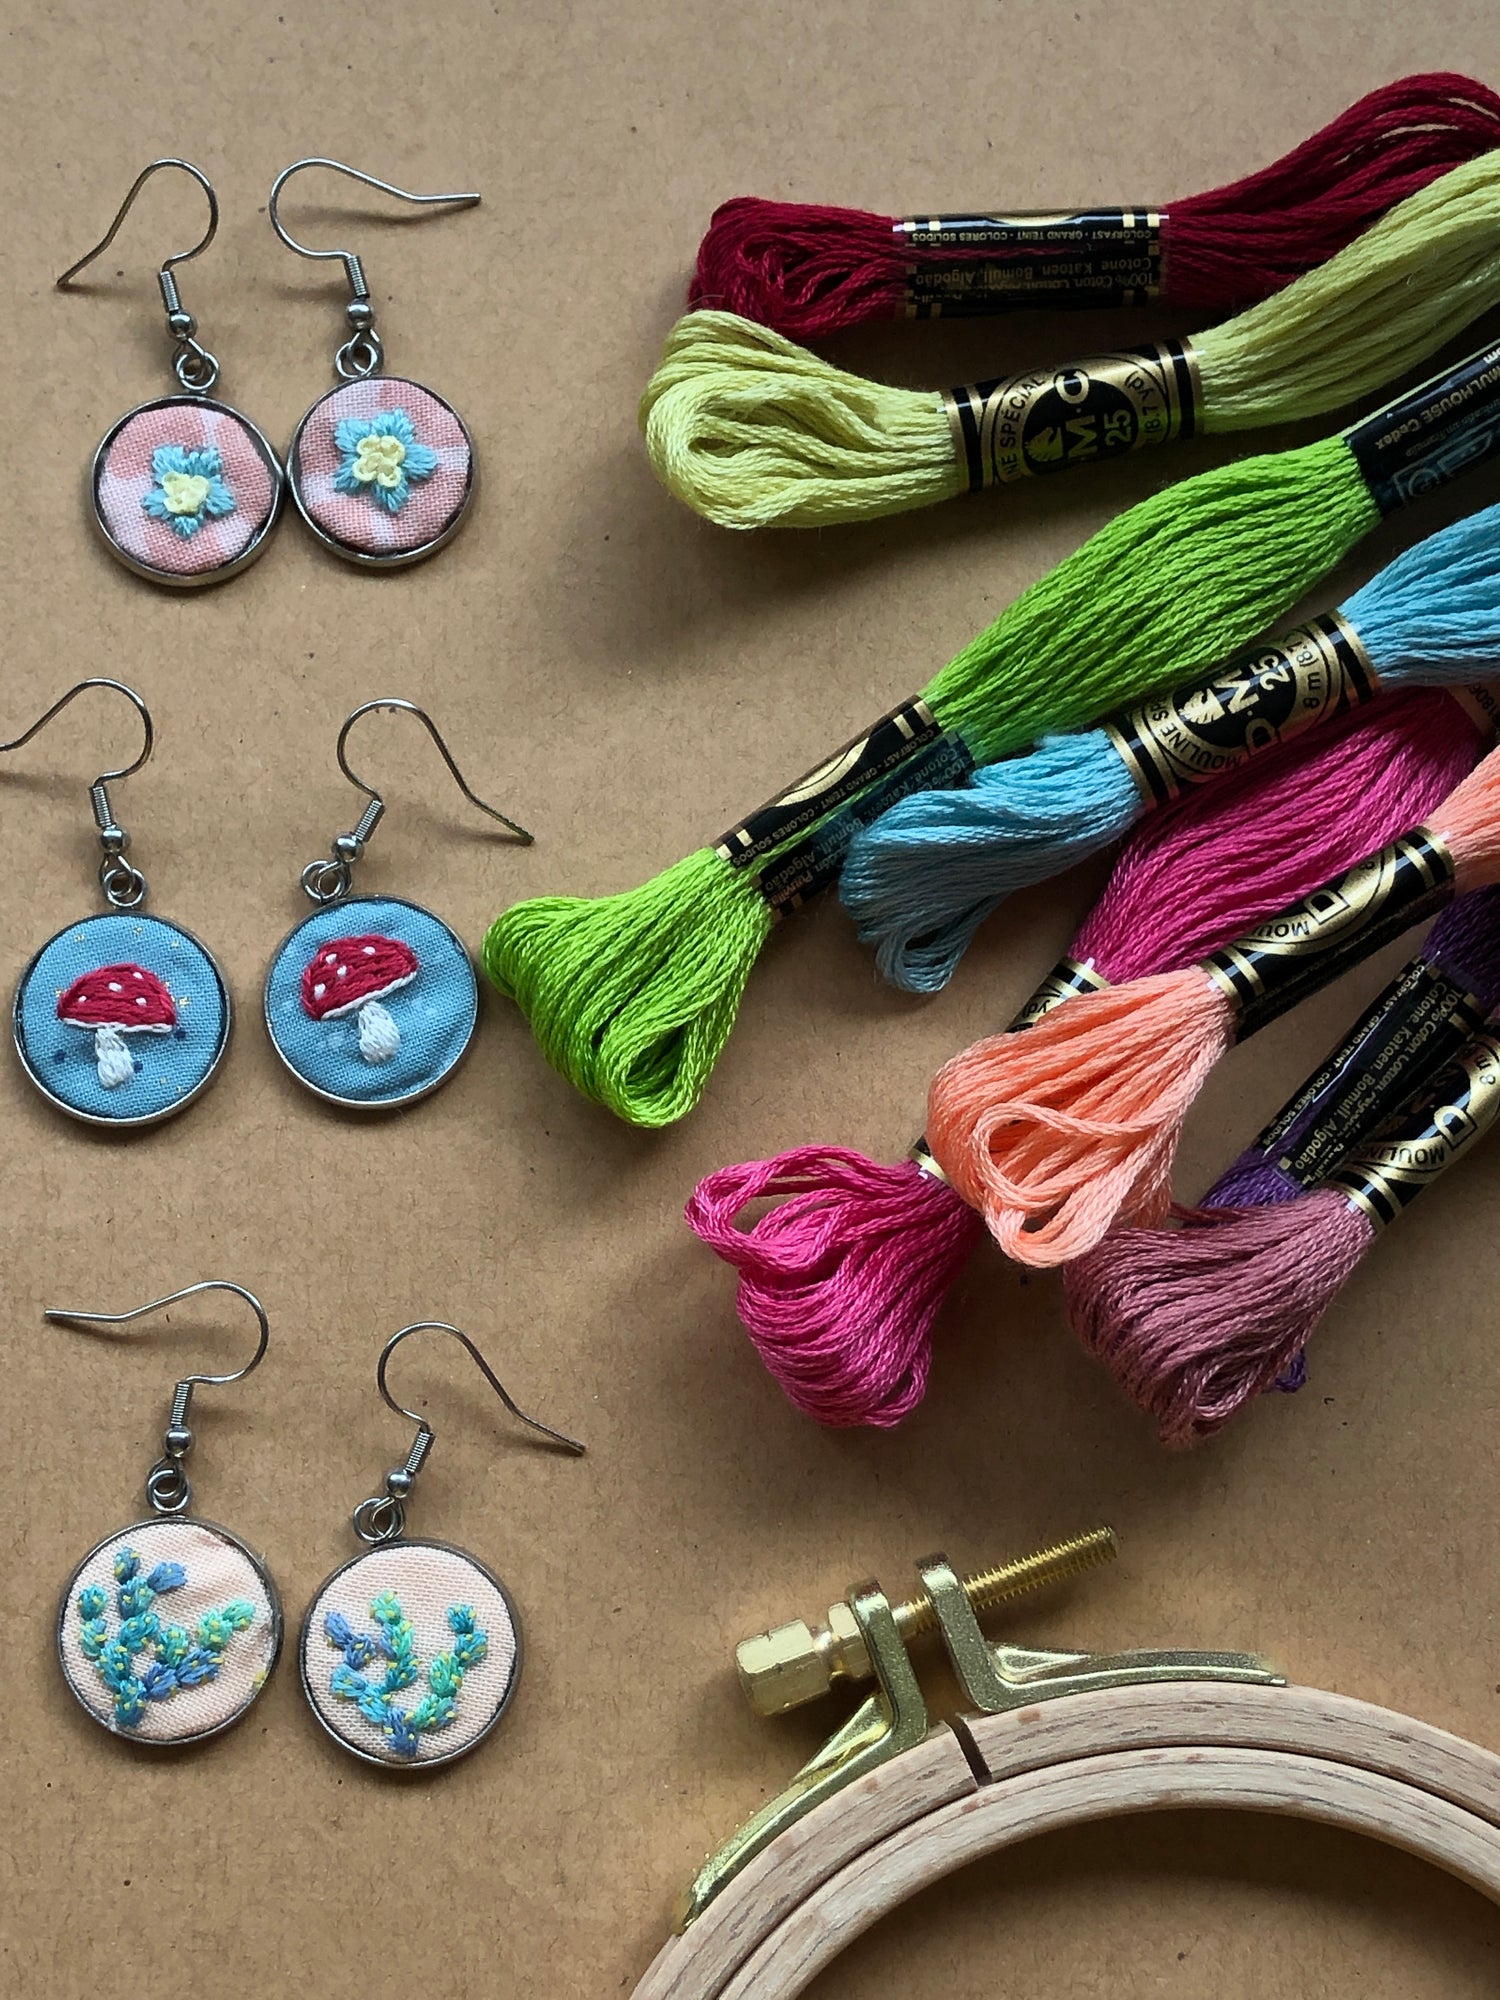 Polymer Clay Jewelry Kit for All Ages. 4 Pair of Earrings Kit DIY